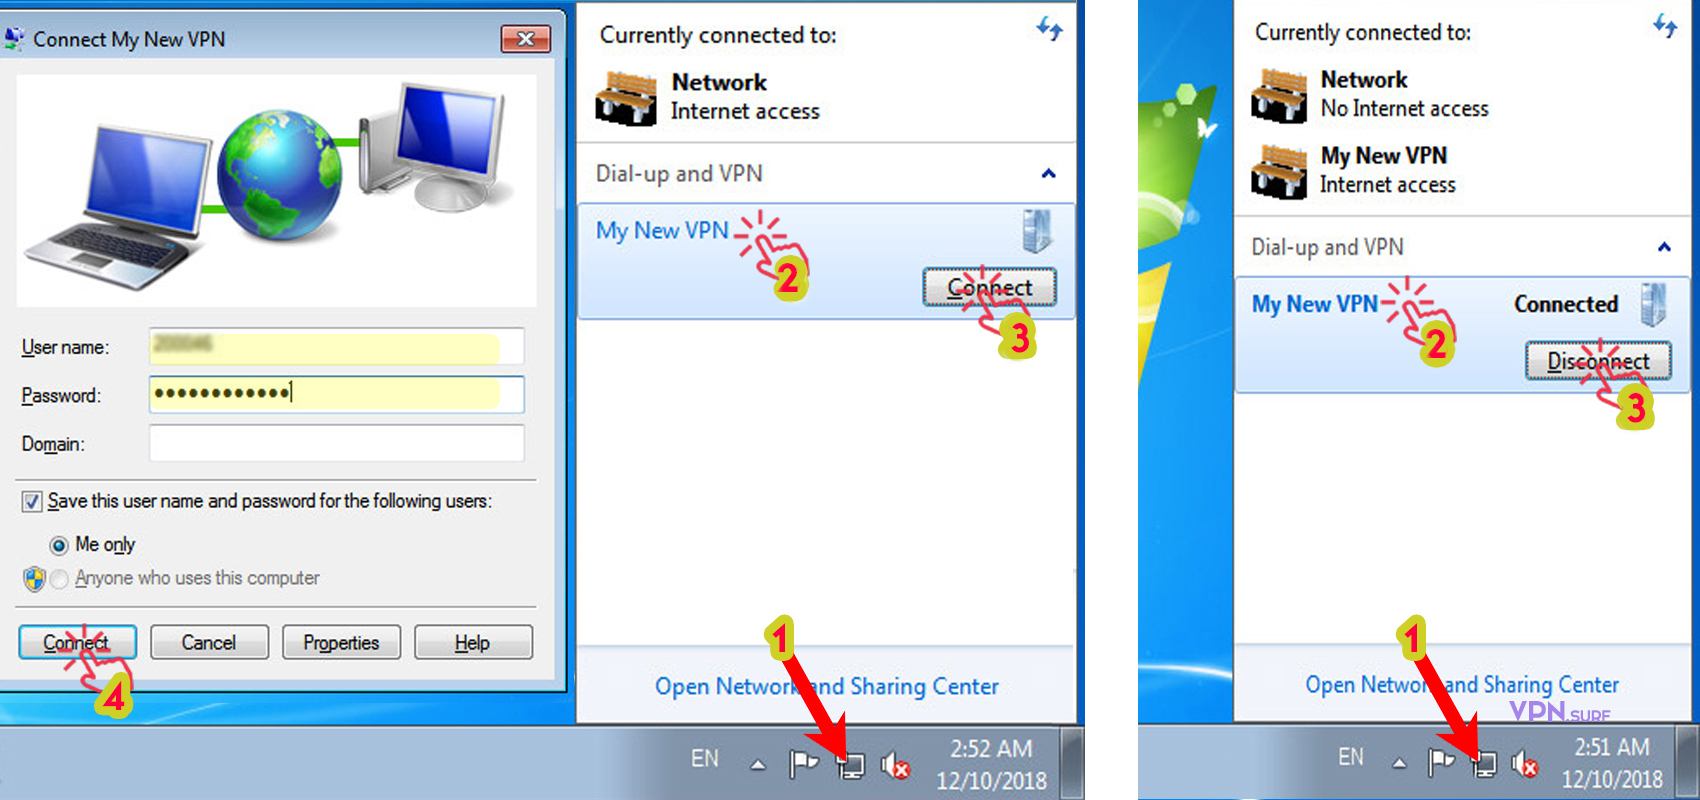 how to remove vpn connection windows 7